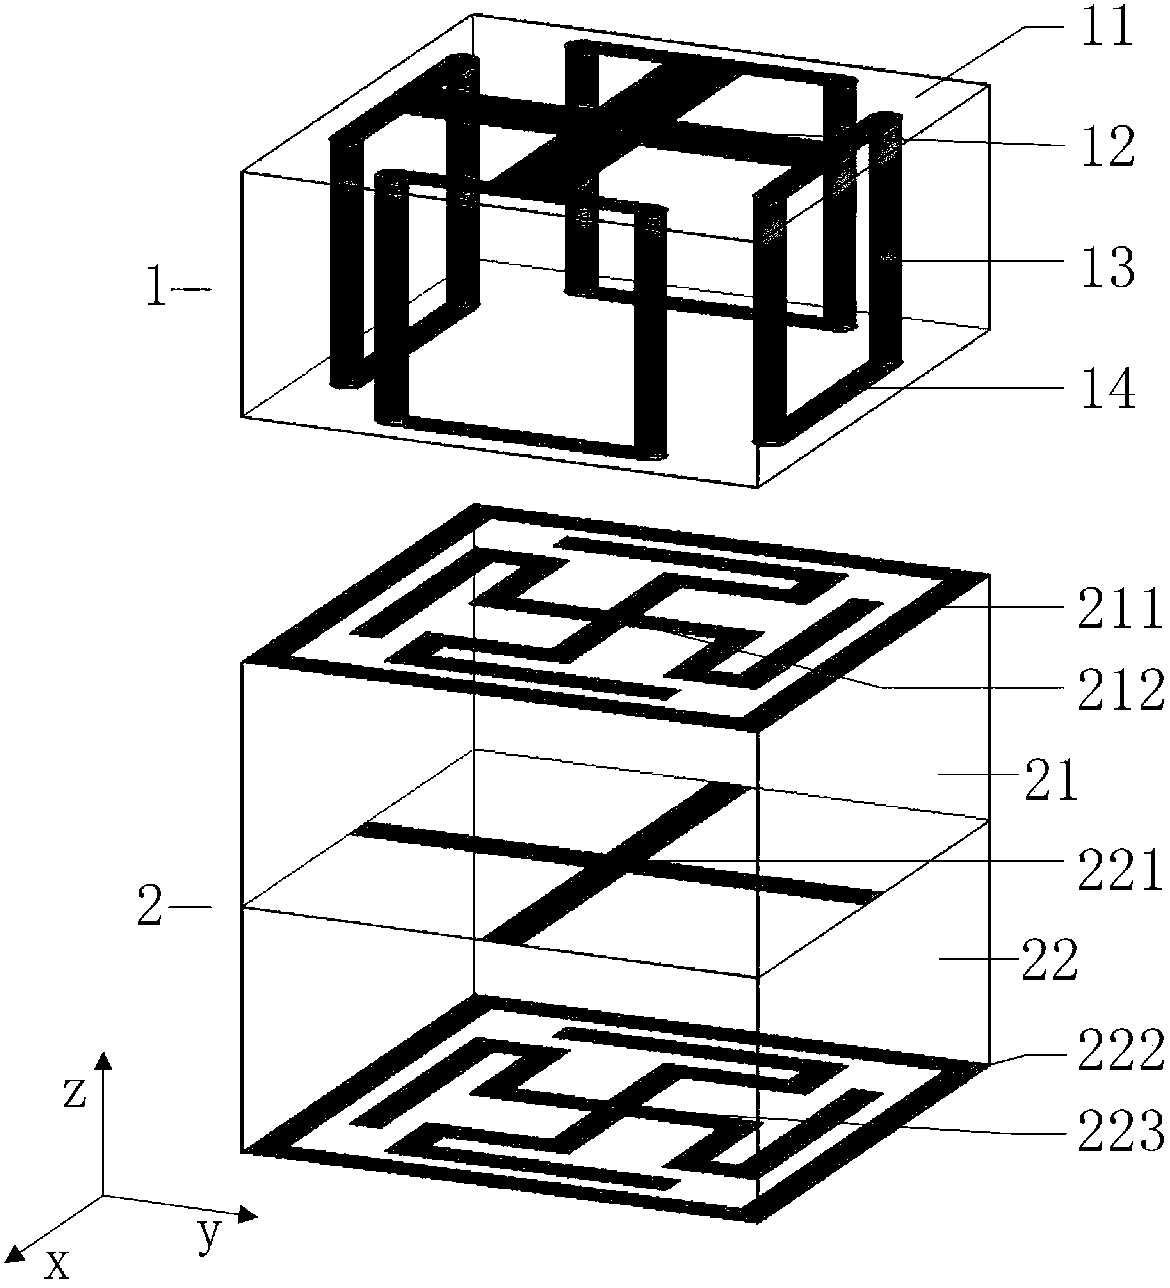 Passband embedded-type frequency selection absorber based on parallel LC resonator loading